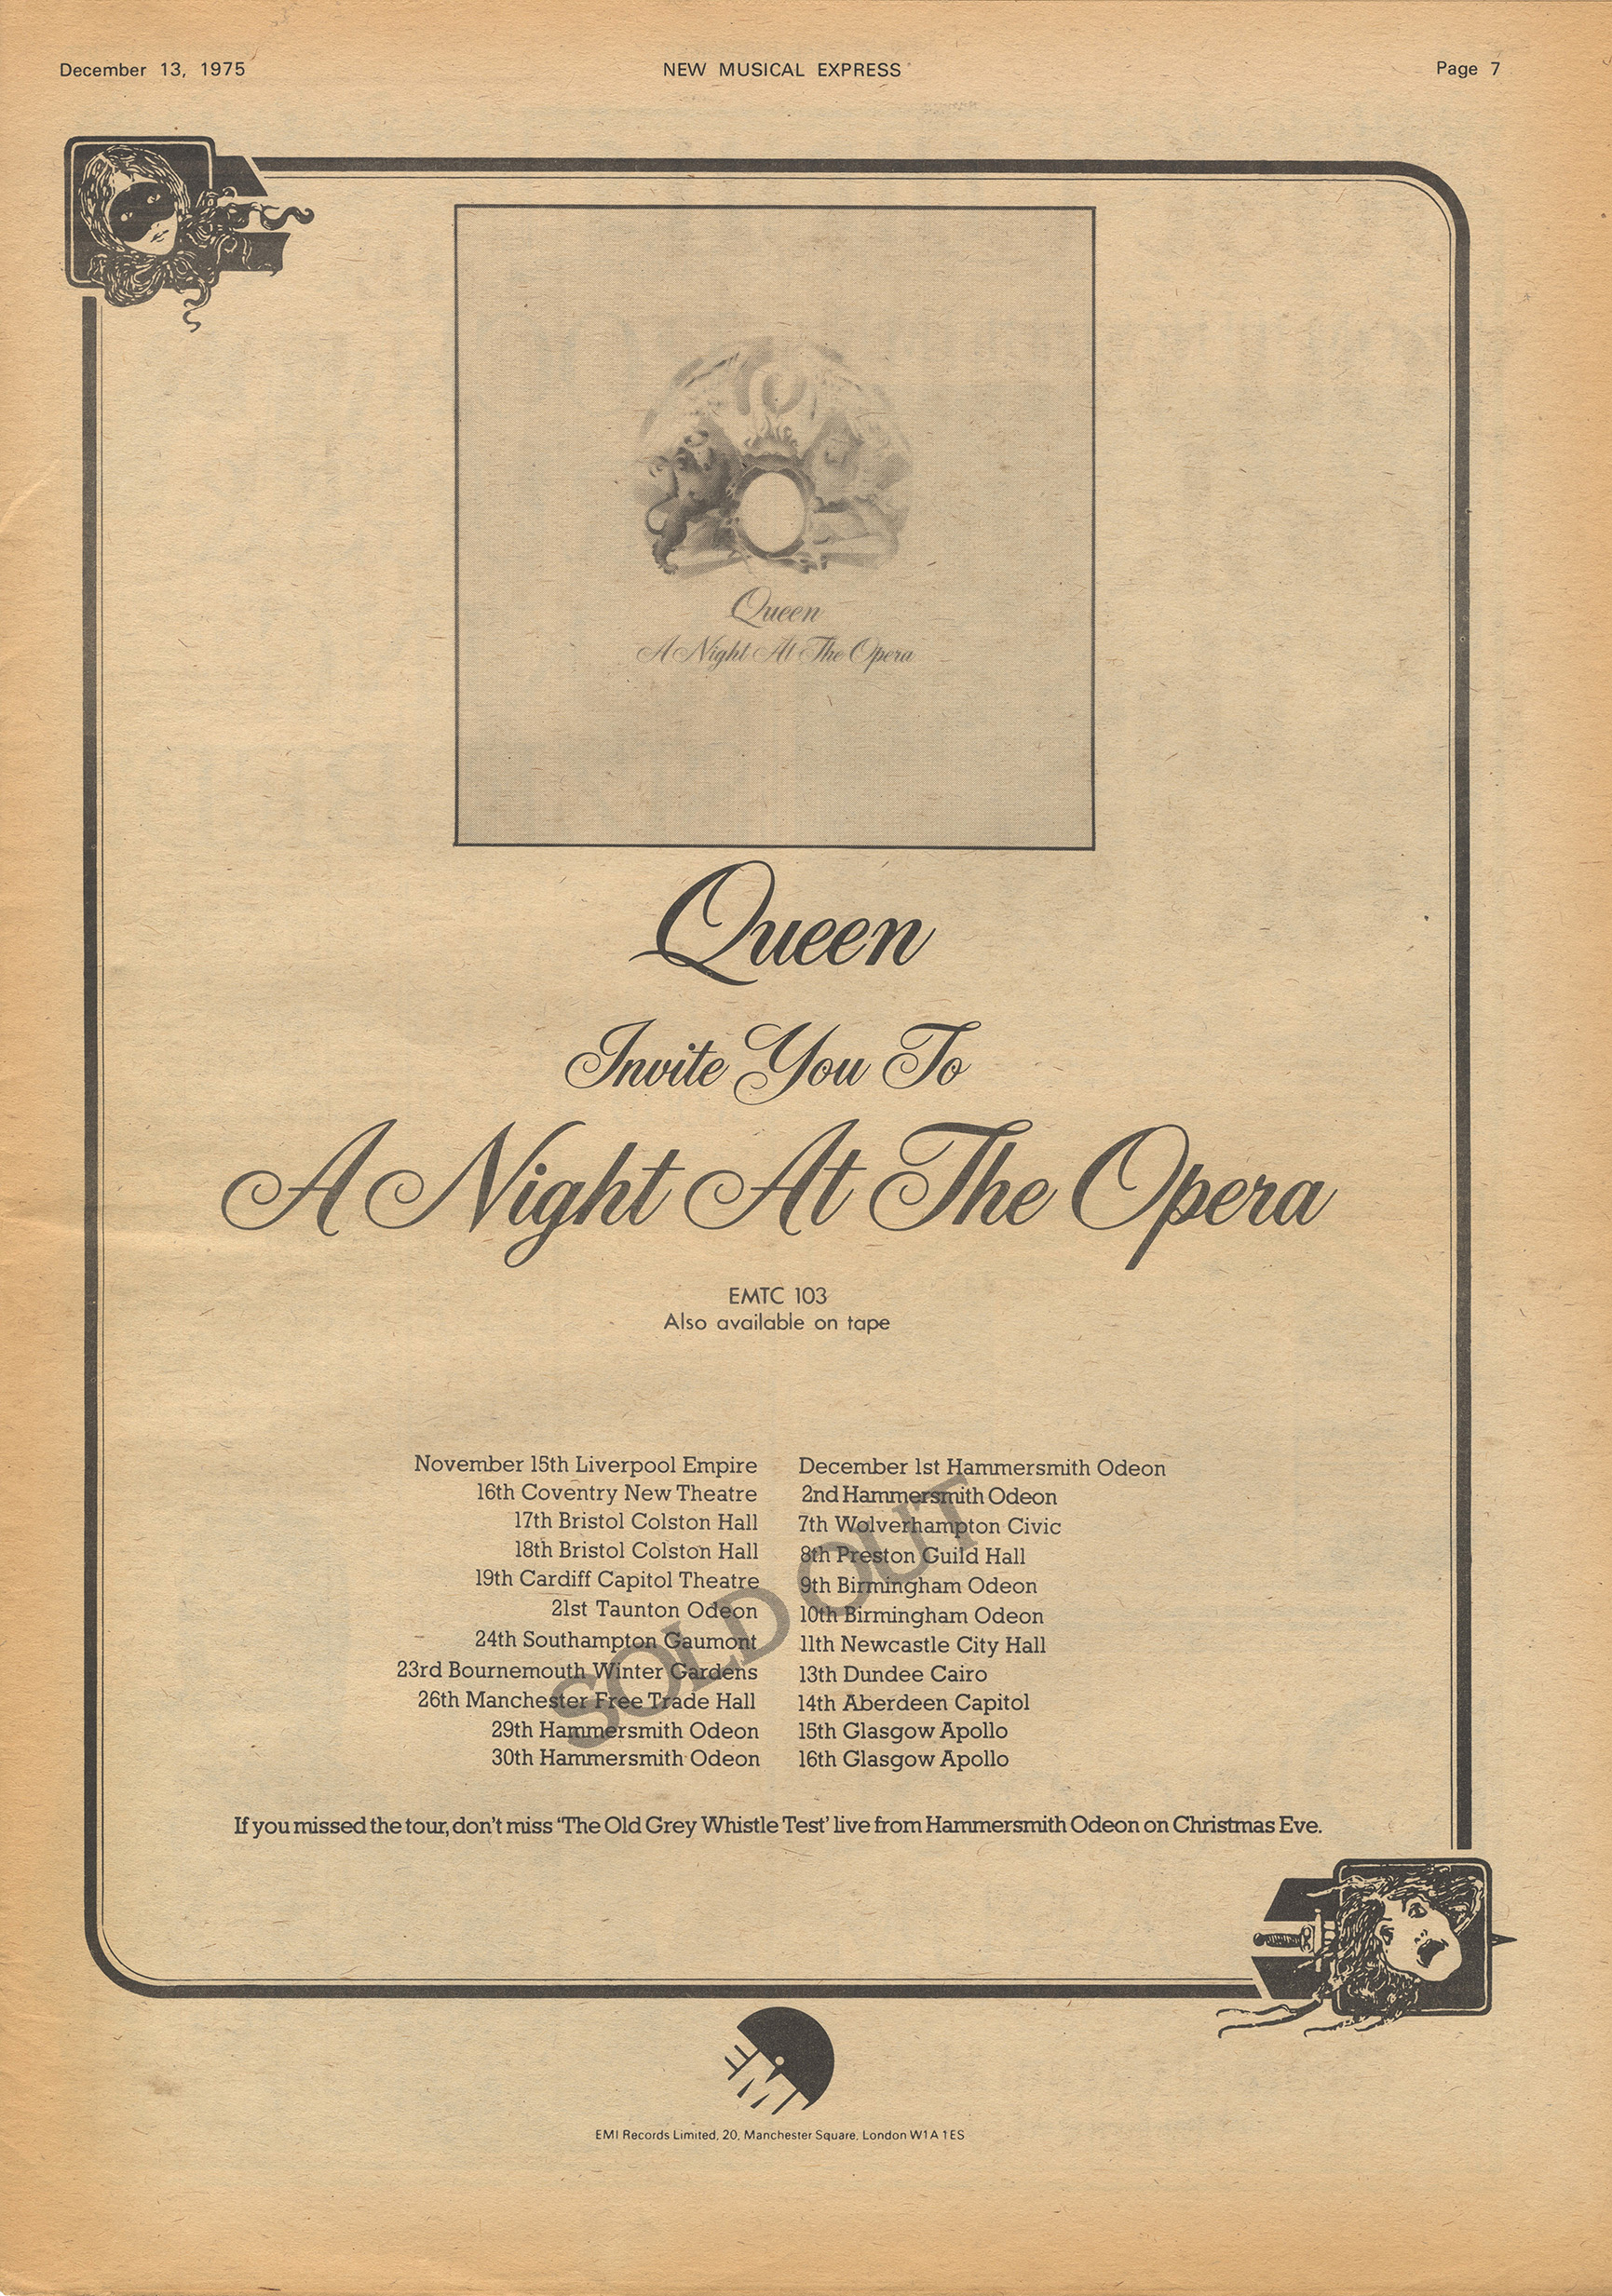 Queen - A Night At The Opera UK tour